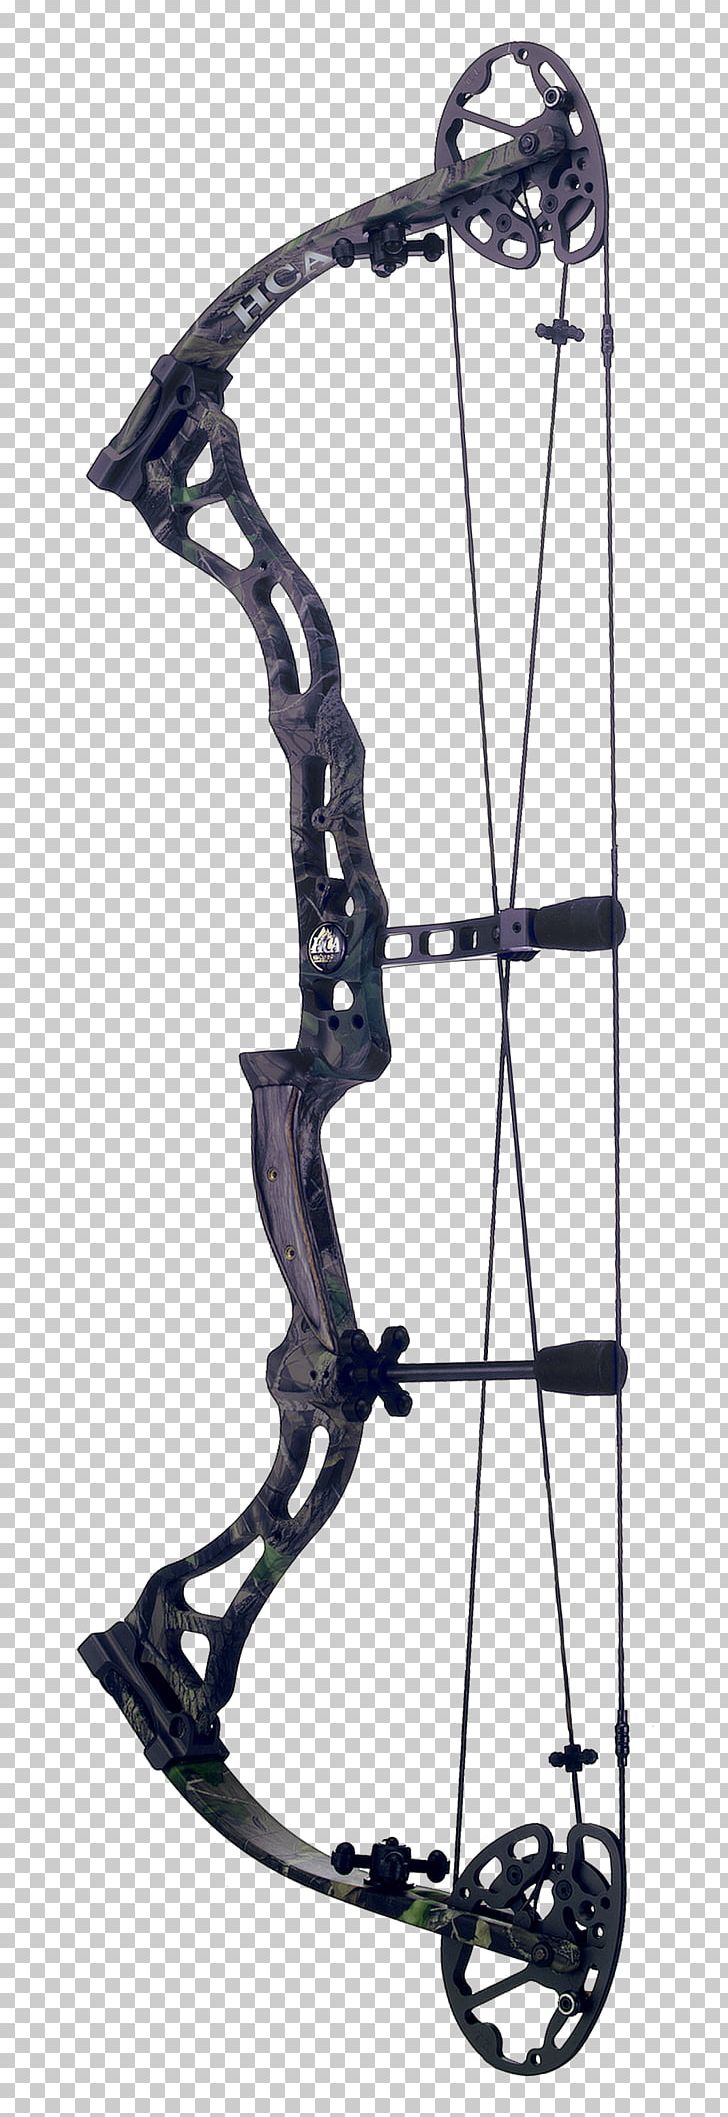 Bow And Arrow Compound Bows Weapon Binary Cam PNG, Clipart, Archery, Arrow, Arrow Bow, Binary Cam, Bit Free PNG Download